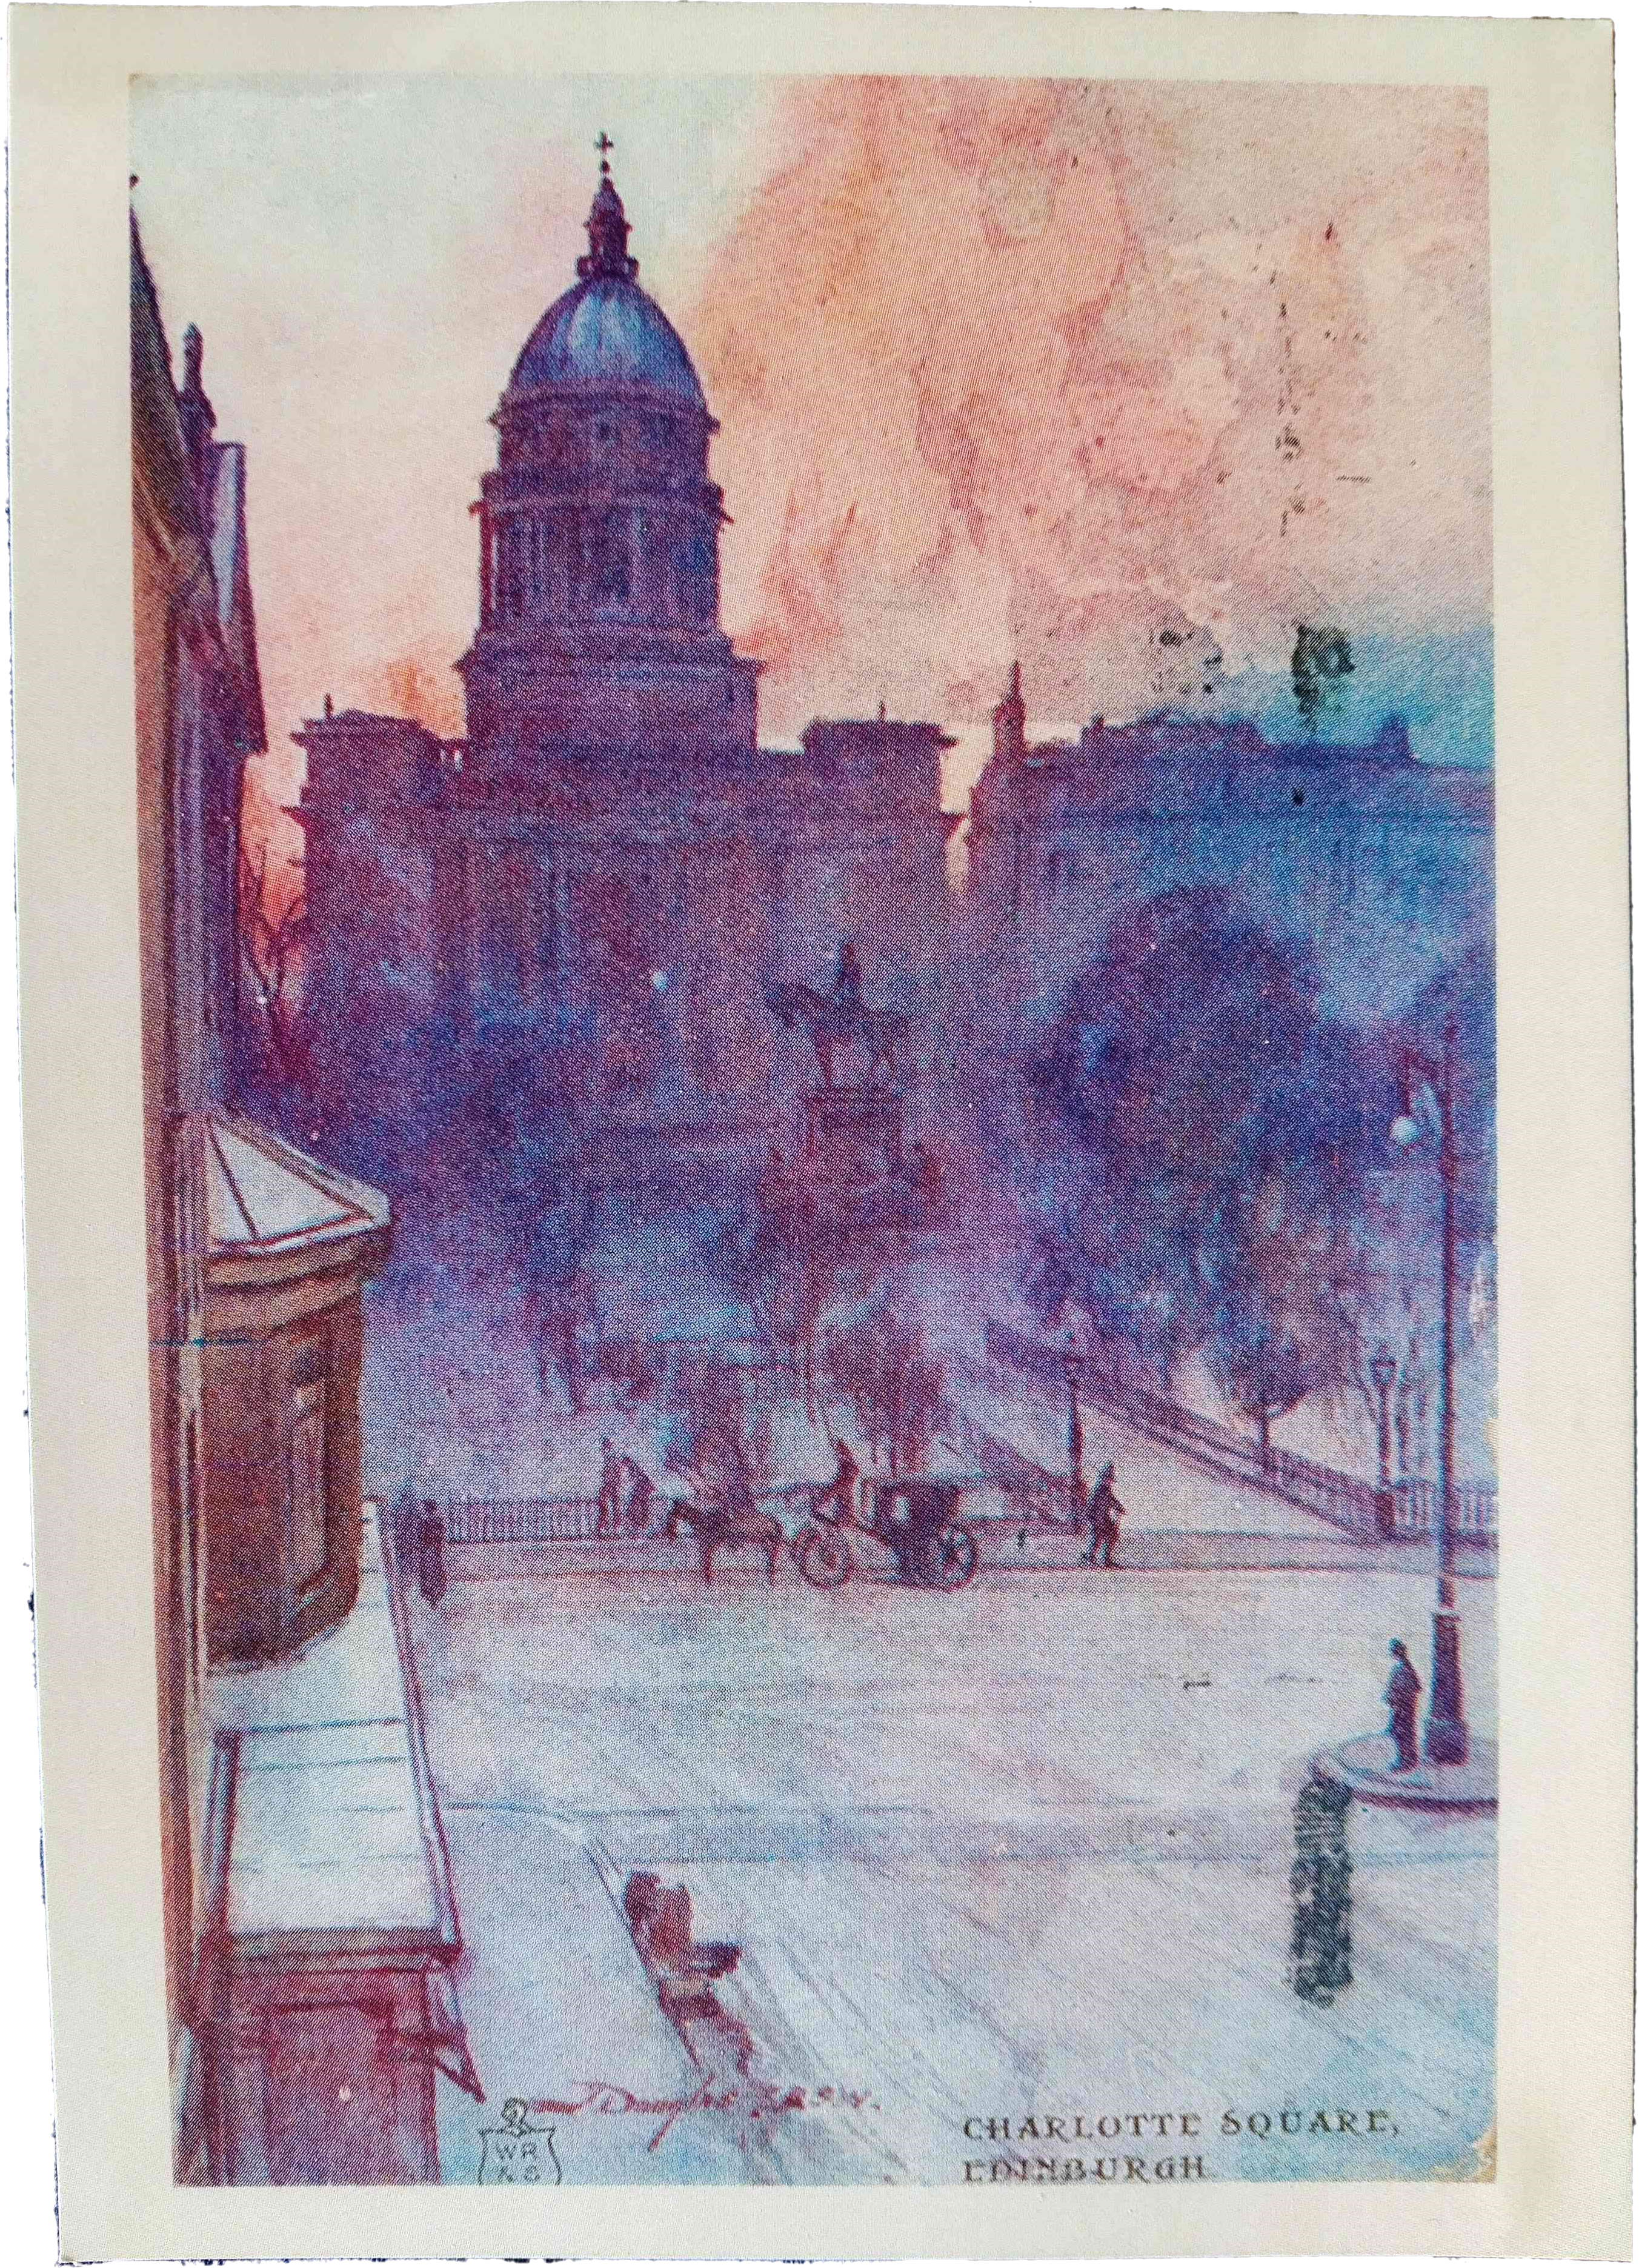 A painting of a nineteenth century city square in the evening with the caption 'Charlotte Square, Edinburgh'